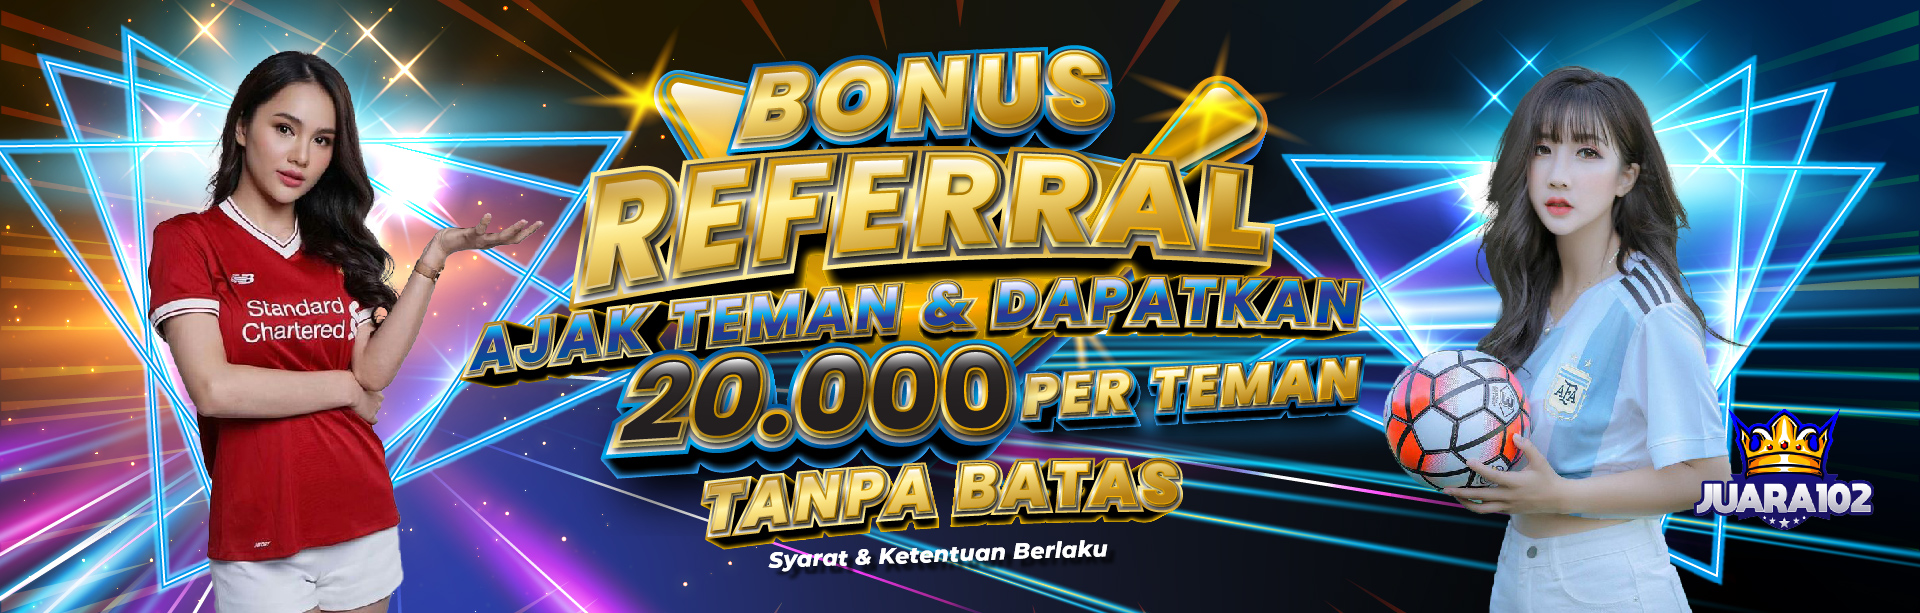 EVENT REFERRAL